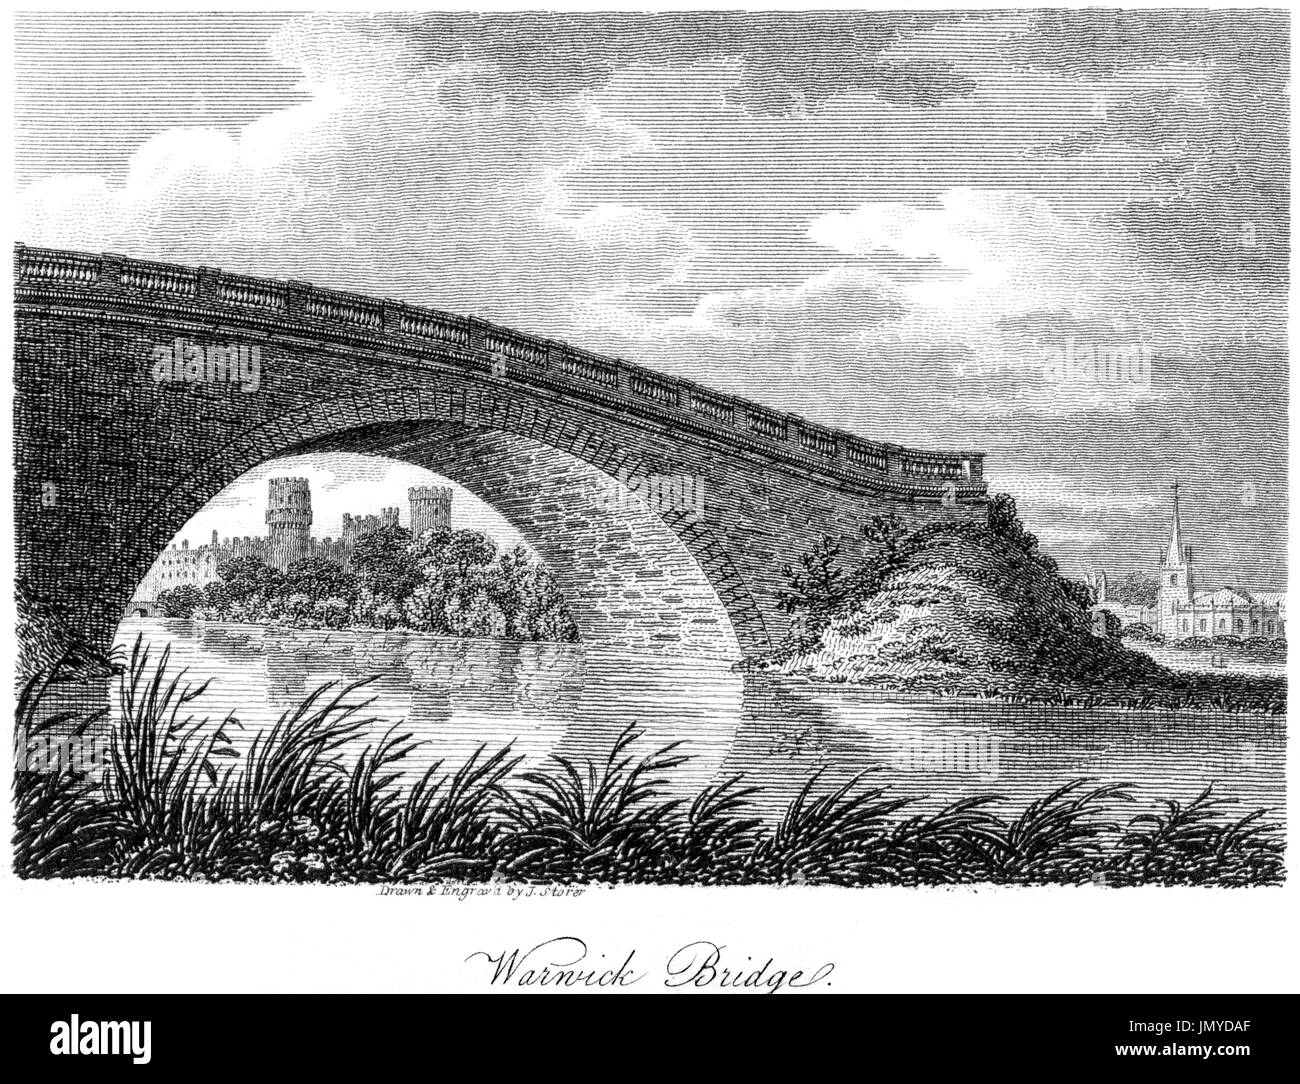 An engraving of Warwick Bridge scanned at high resolution from a book printed in 1808.  Believed copyright free. Stock Photo